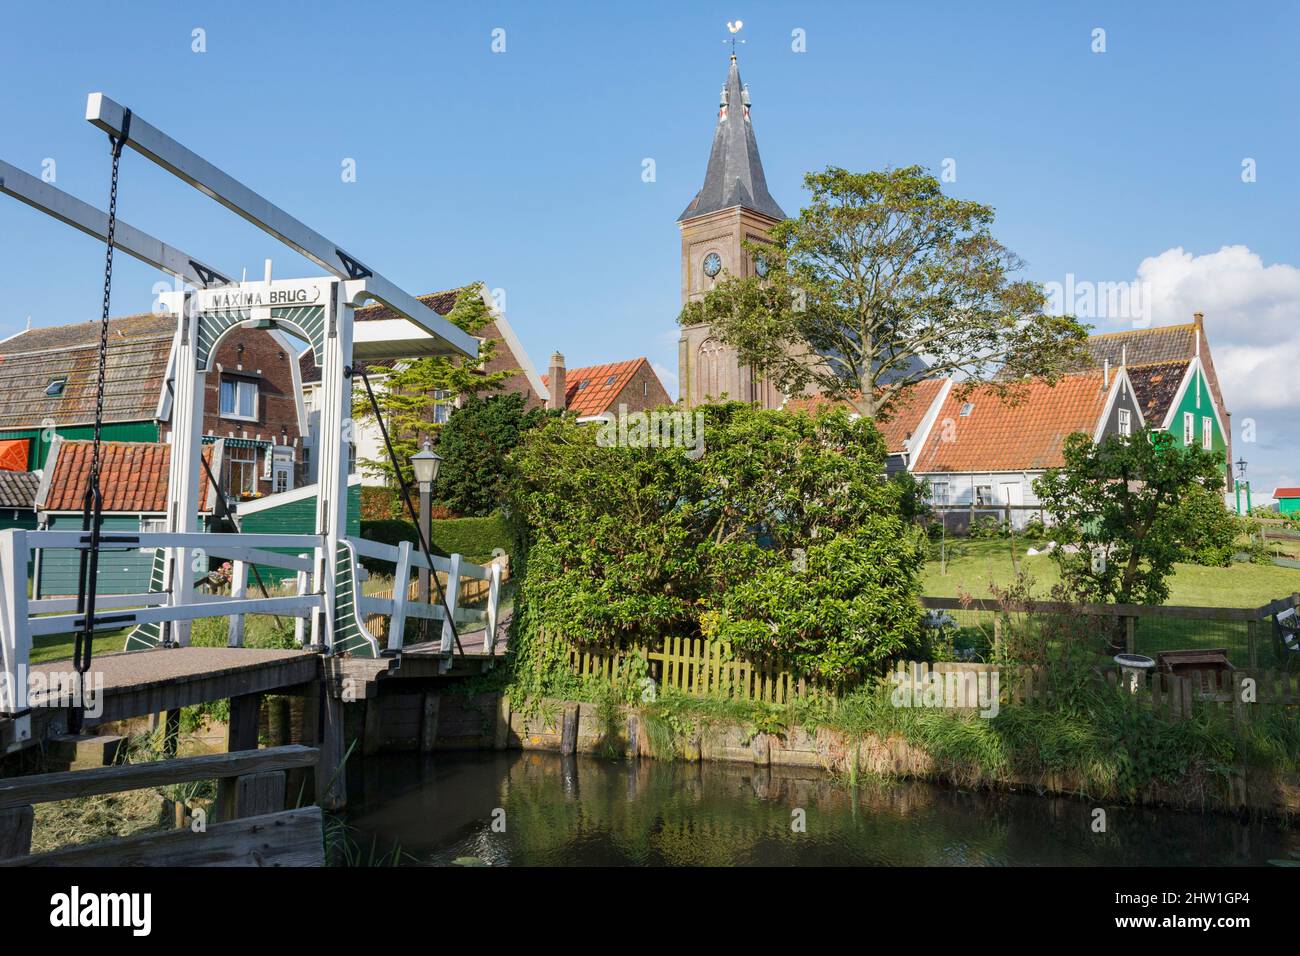 Netherlands, North Holland, Marken, pedestrian bridge, church and typical painted wooden houses Stock Photo